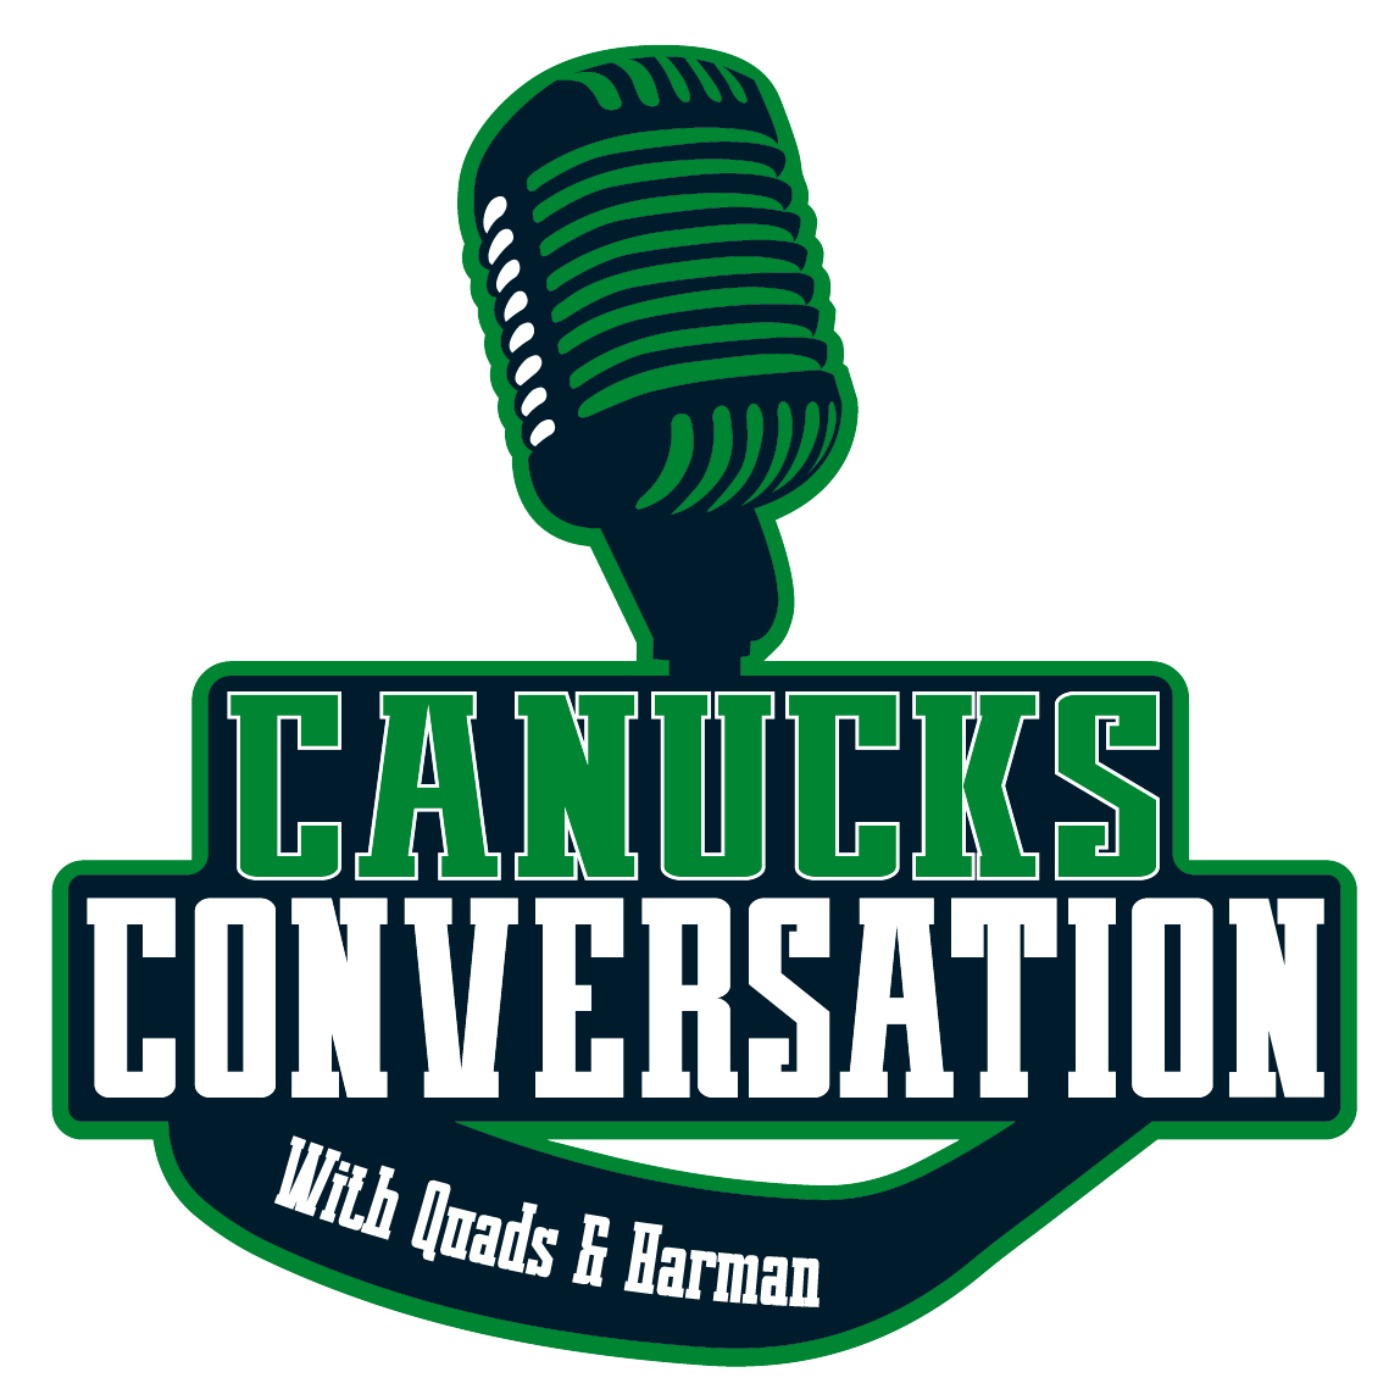 Mar. 18: Canucks fans' wishes over the final month of the season (Ep. 580)